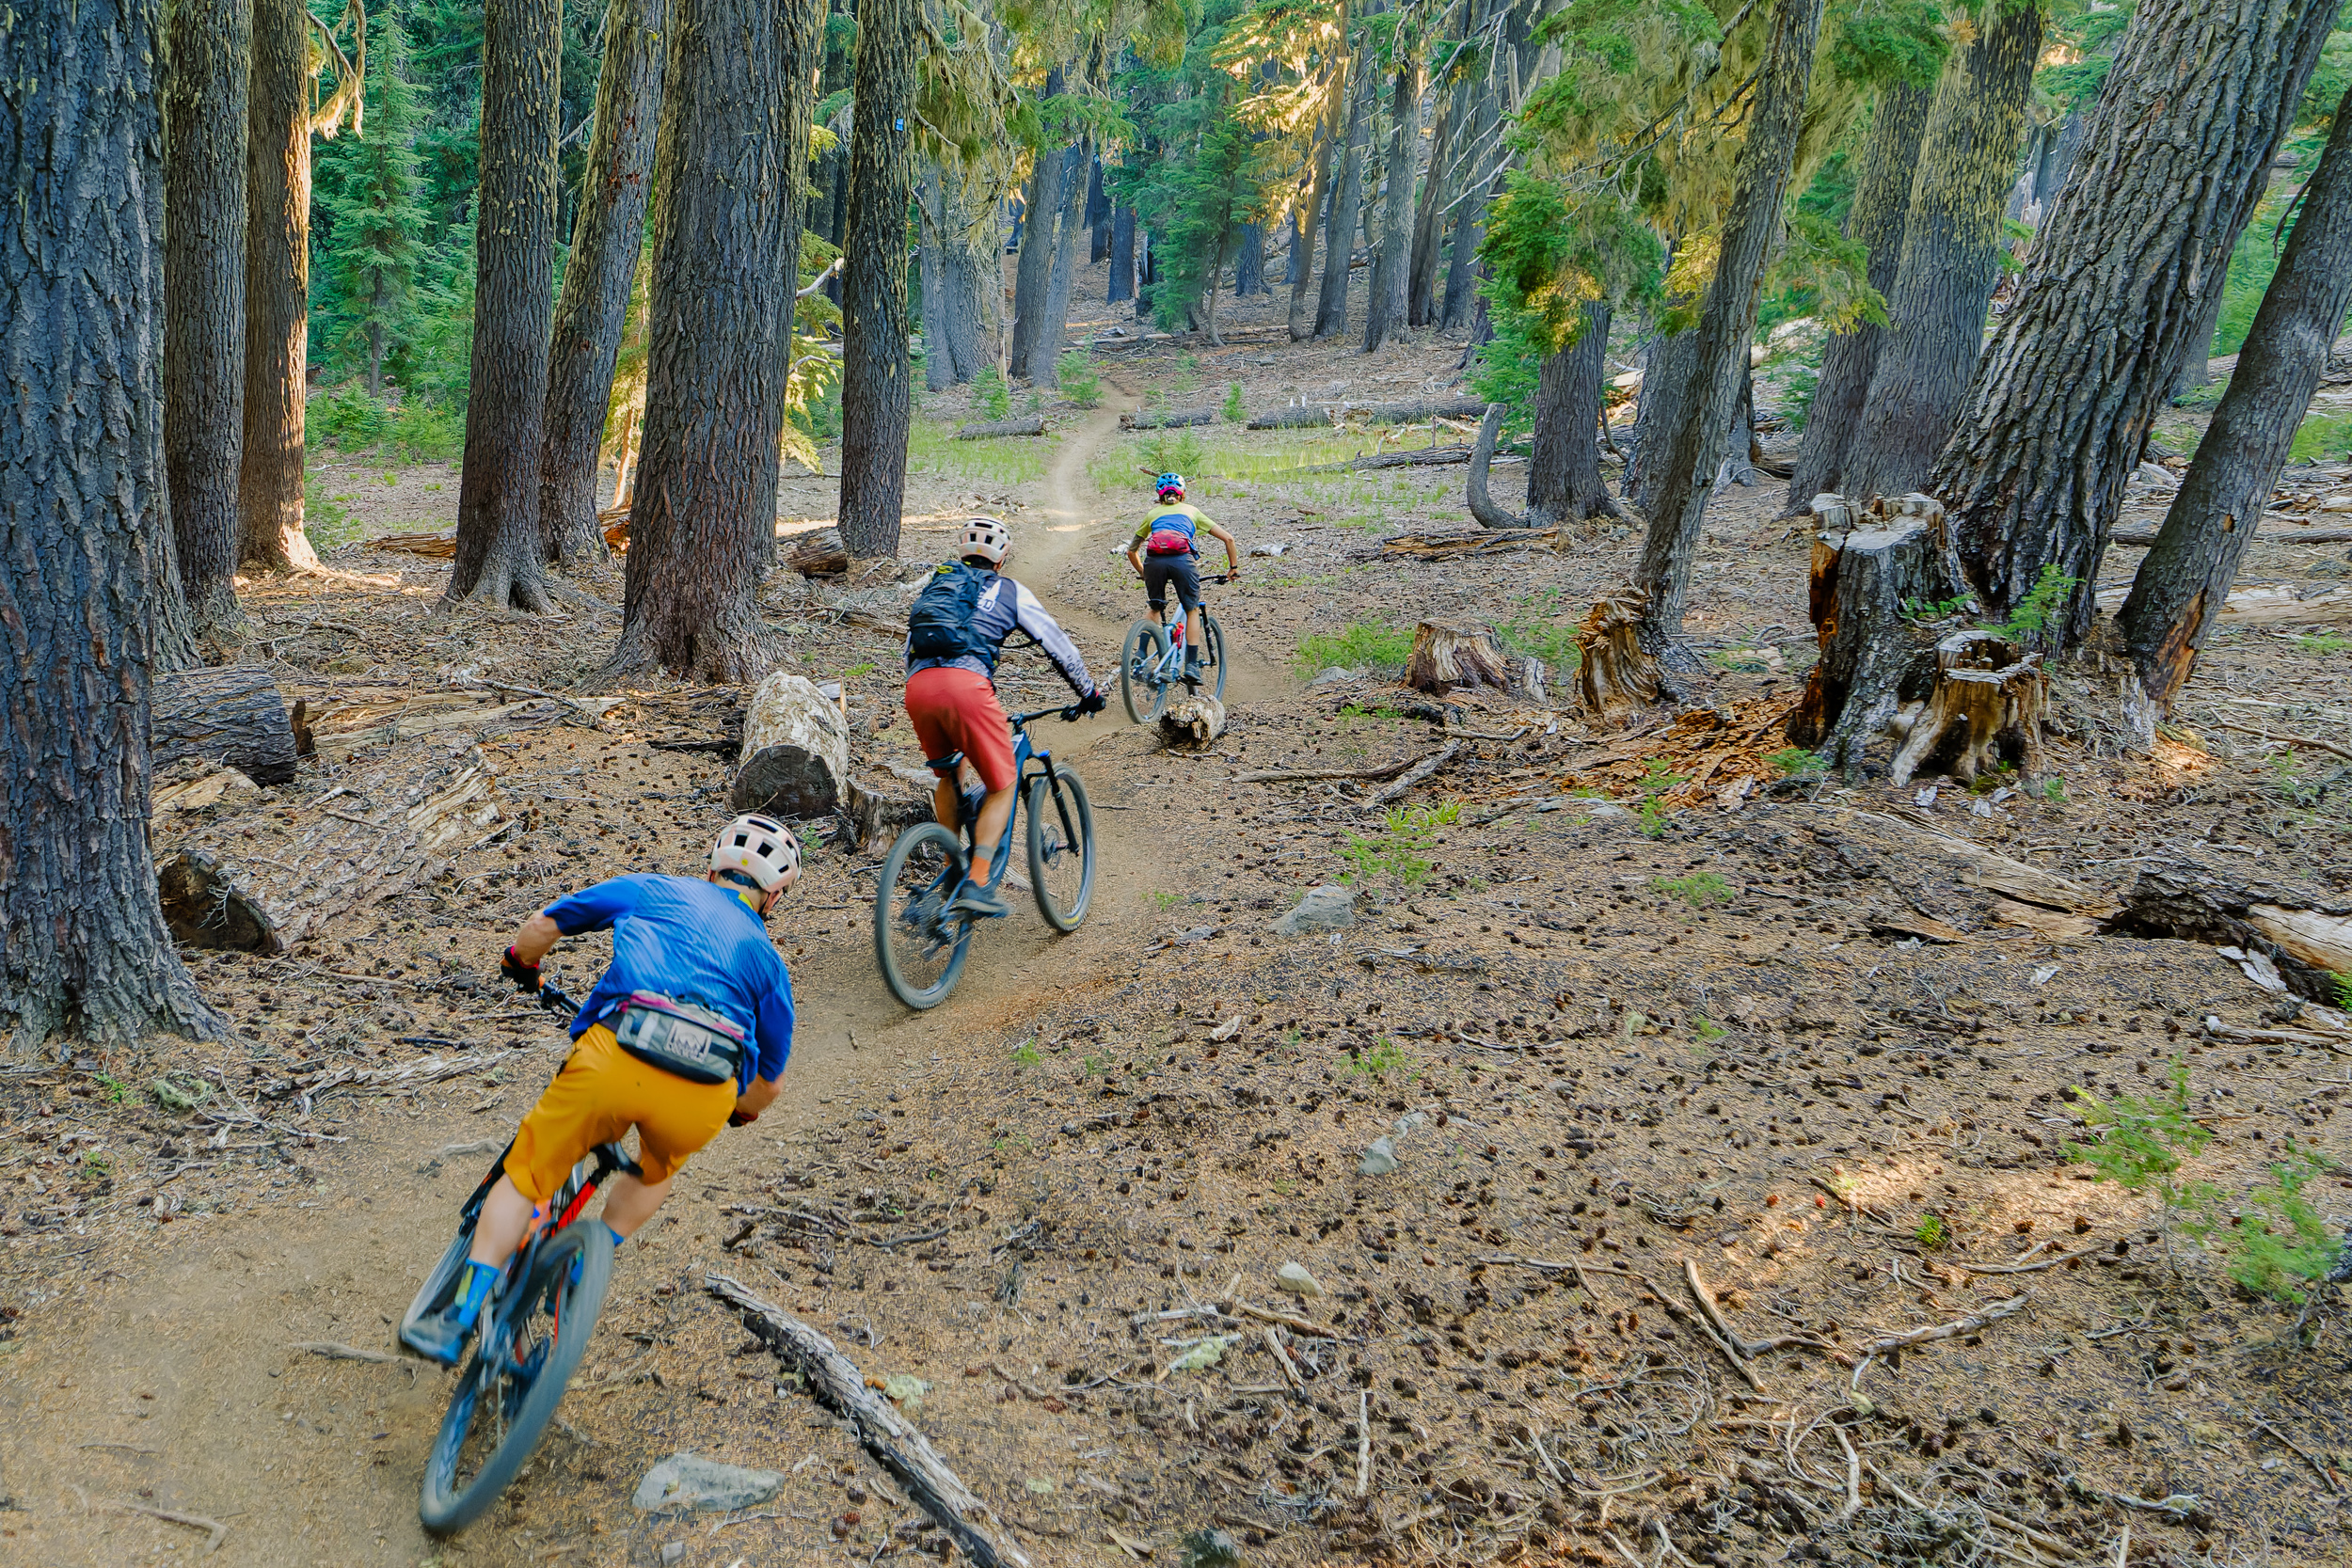 A group of mountain bikers descends the on a forested single track trail near Bend, Oregon